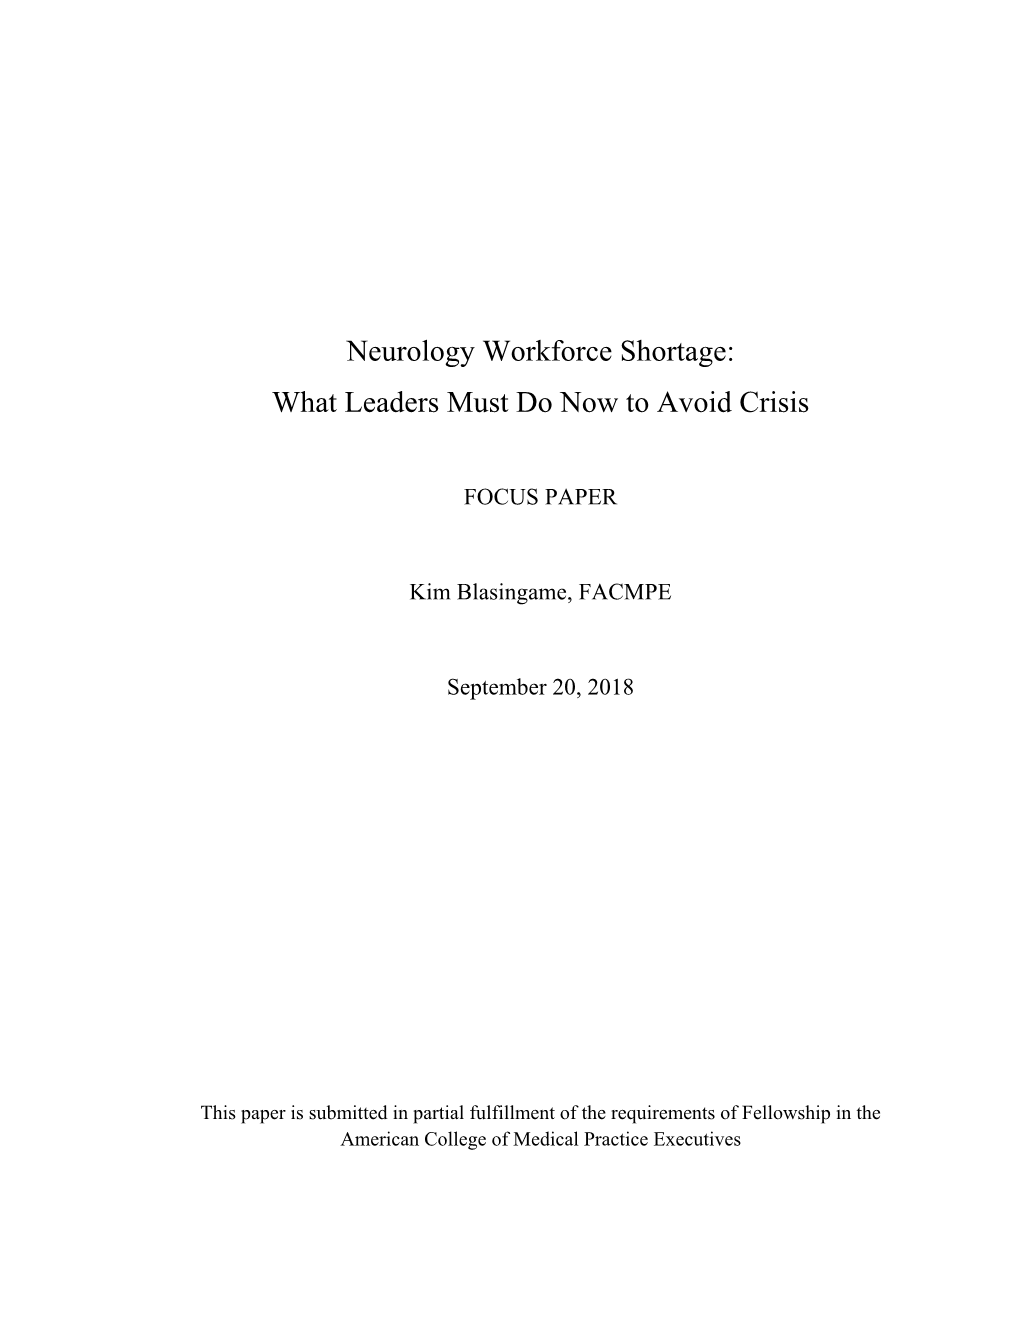 Neurology Workforce Shortage: What Leaders Must Do Now to Avoid Crisis